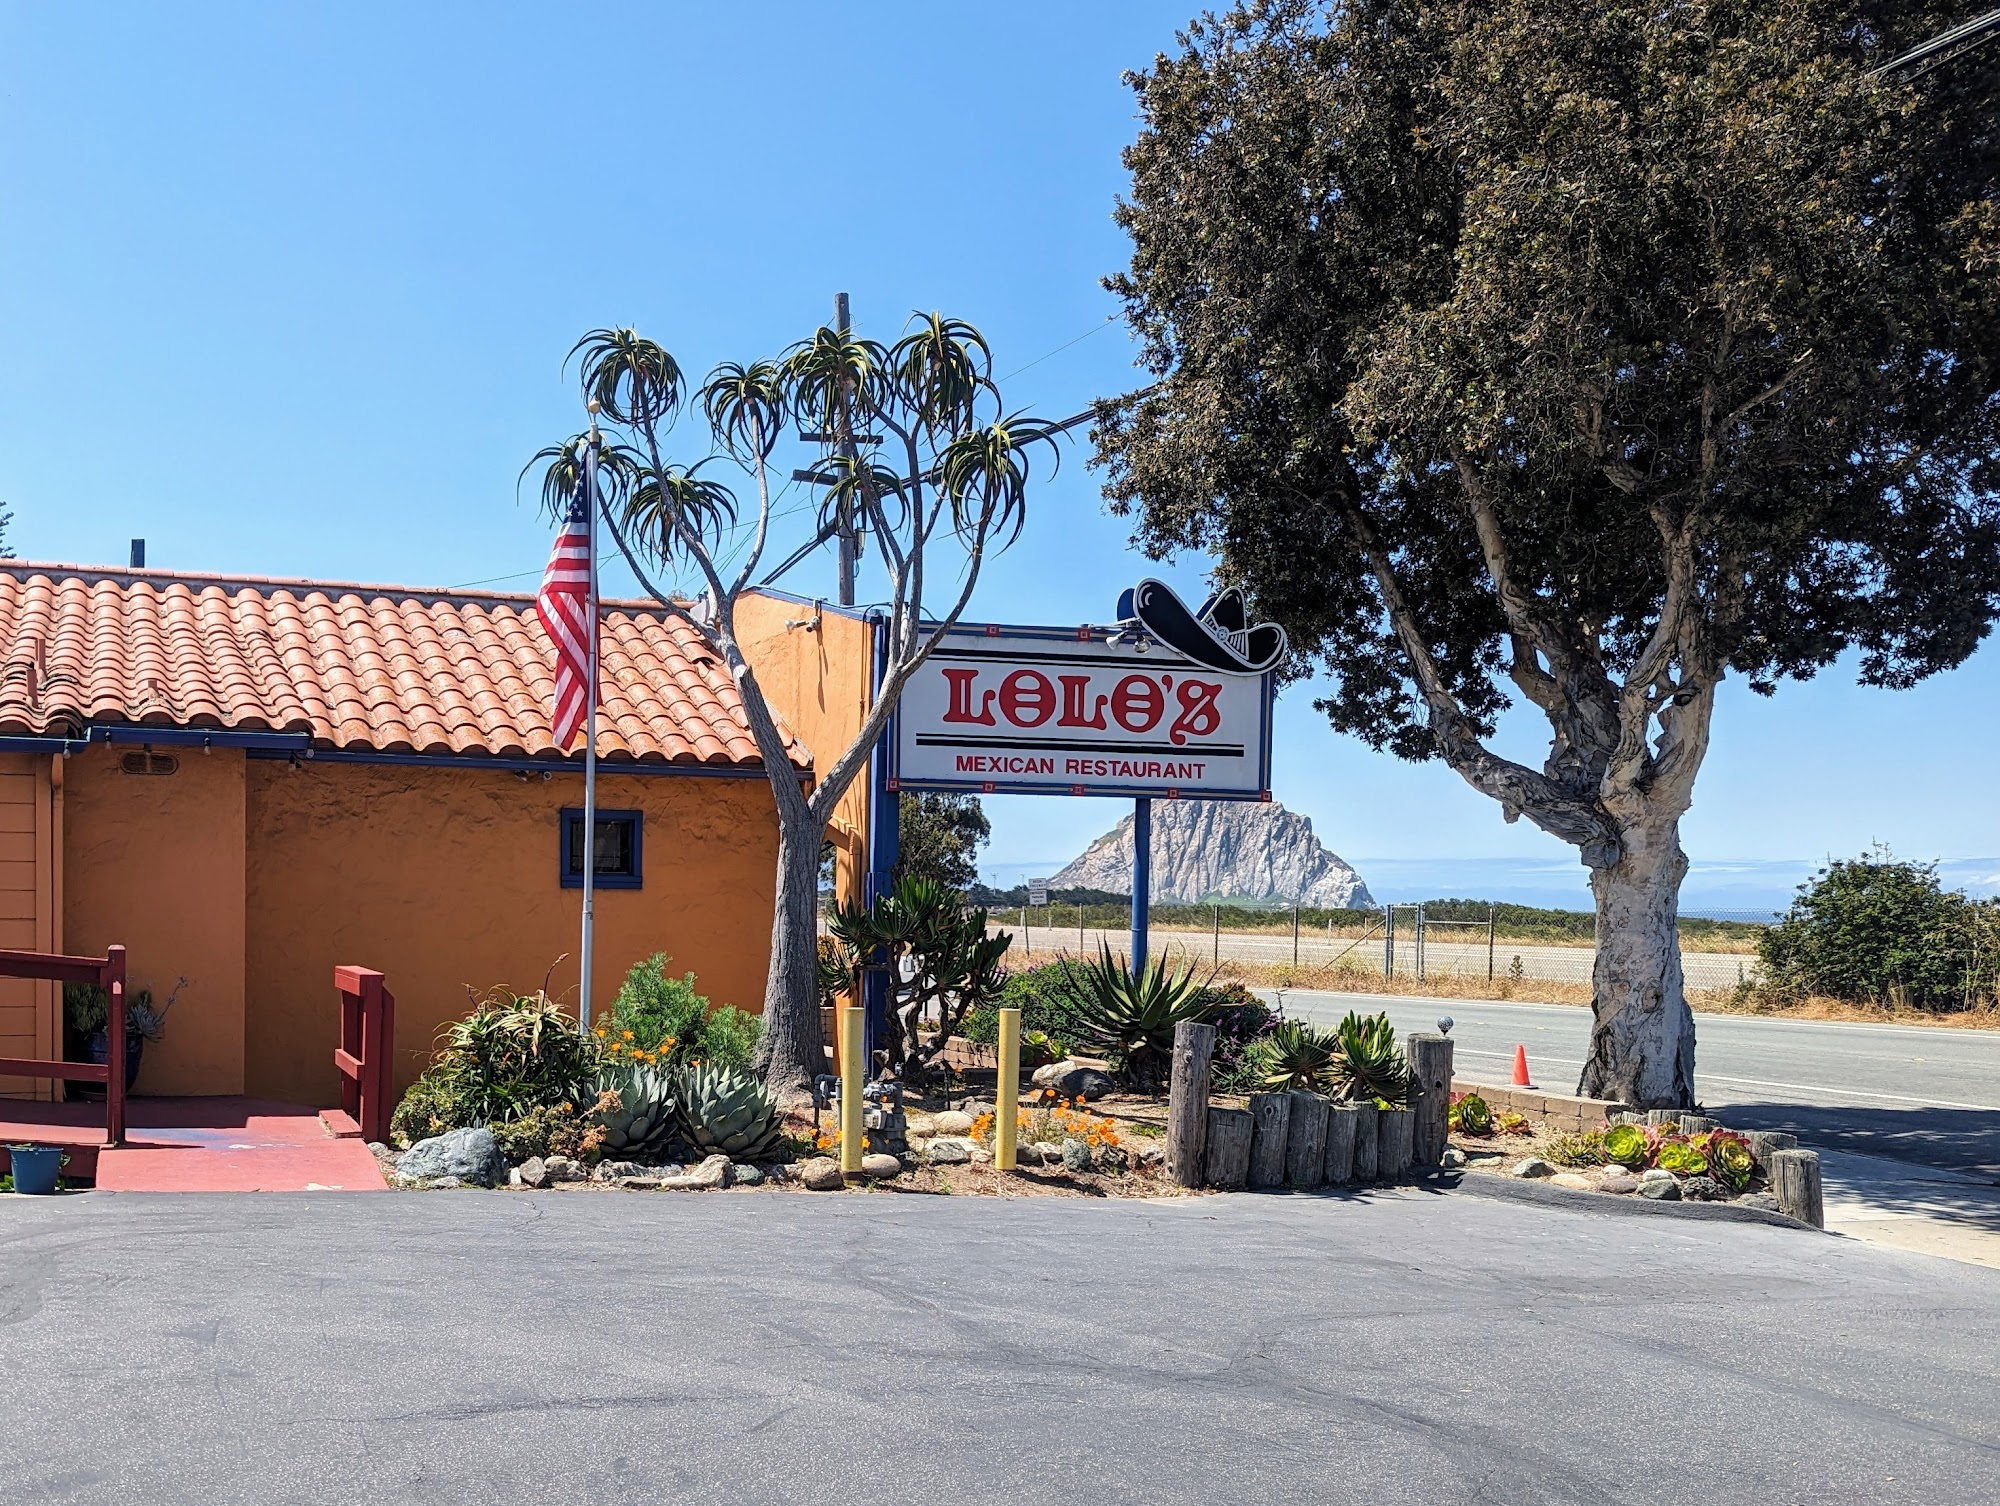 Lolo's Mexican Restaurant